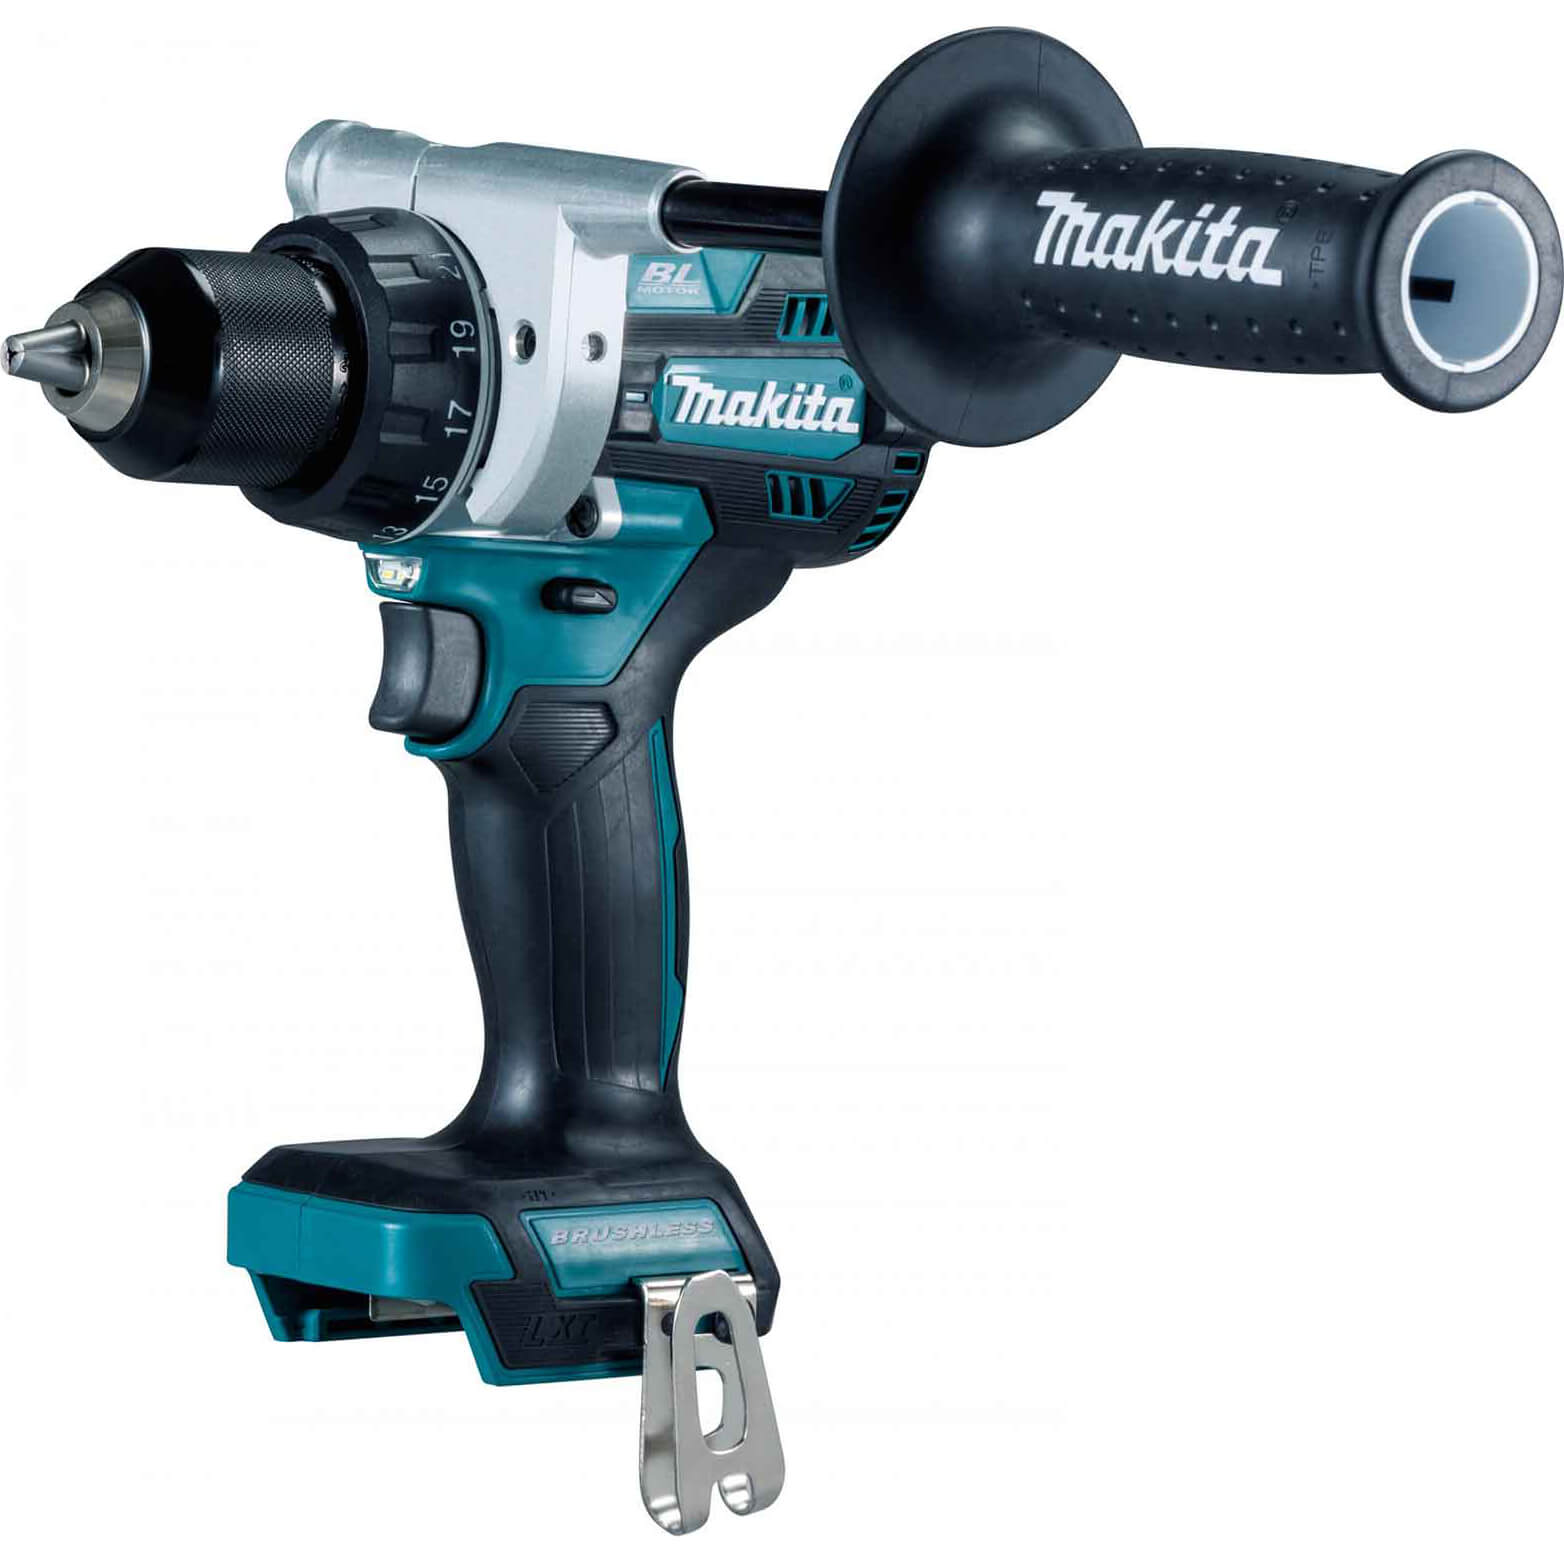 Image of Makita DDF486 18v LXT Cordless Brushless Drill Driver No Batteries No Charger No Case